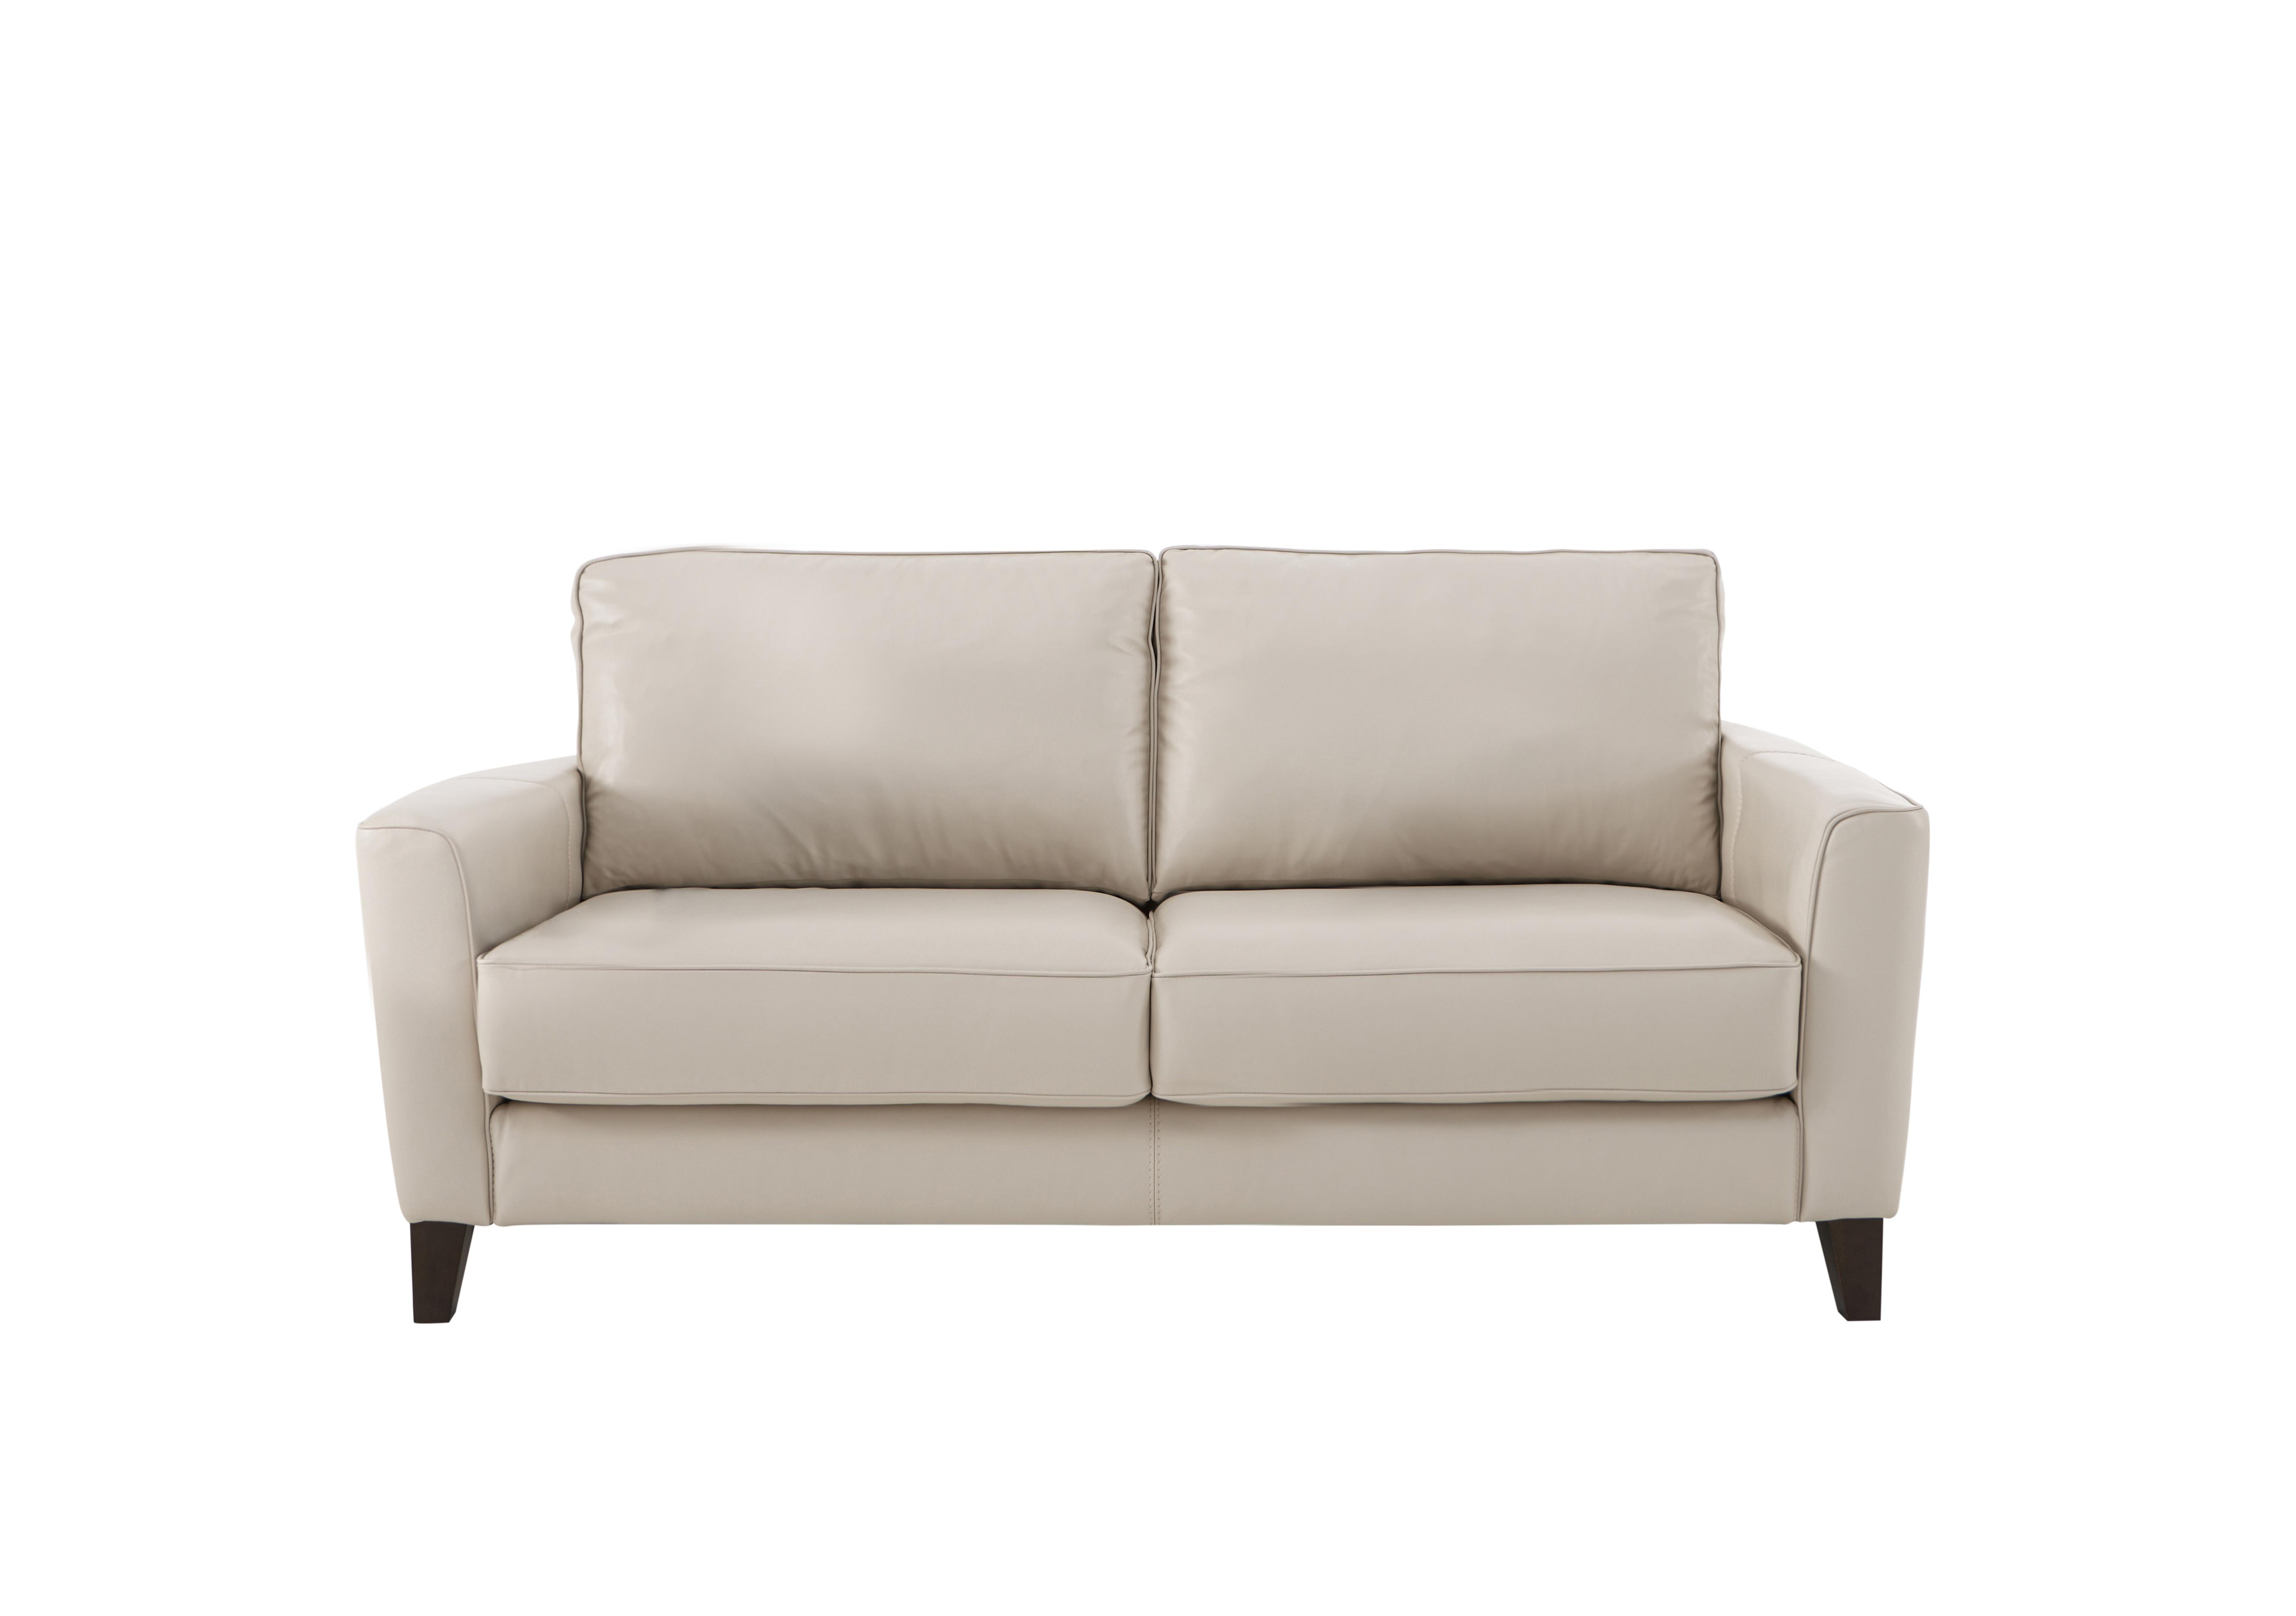 Brondby 2 Seater Leather Sofa in Bv-156e Frost on Furniture Village